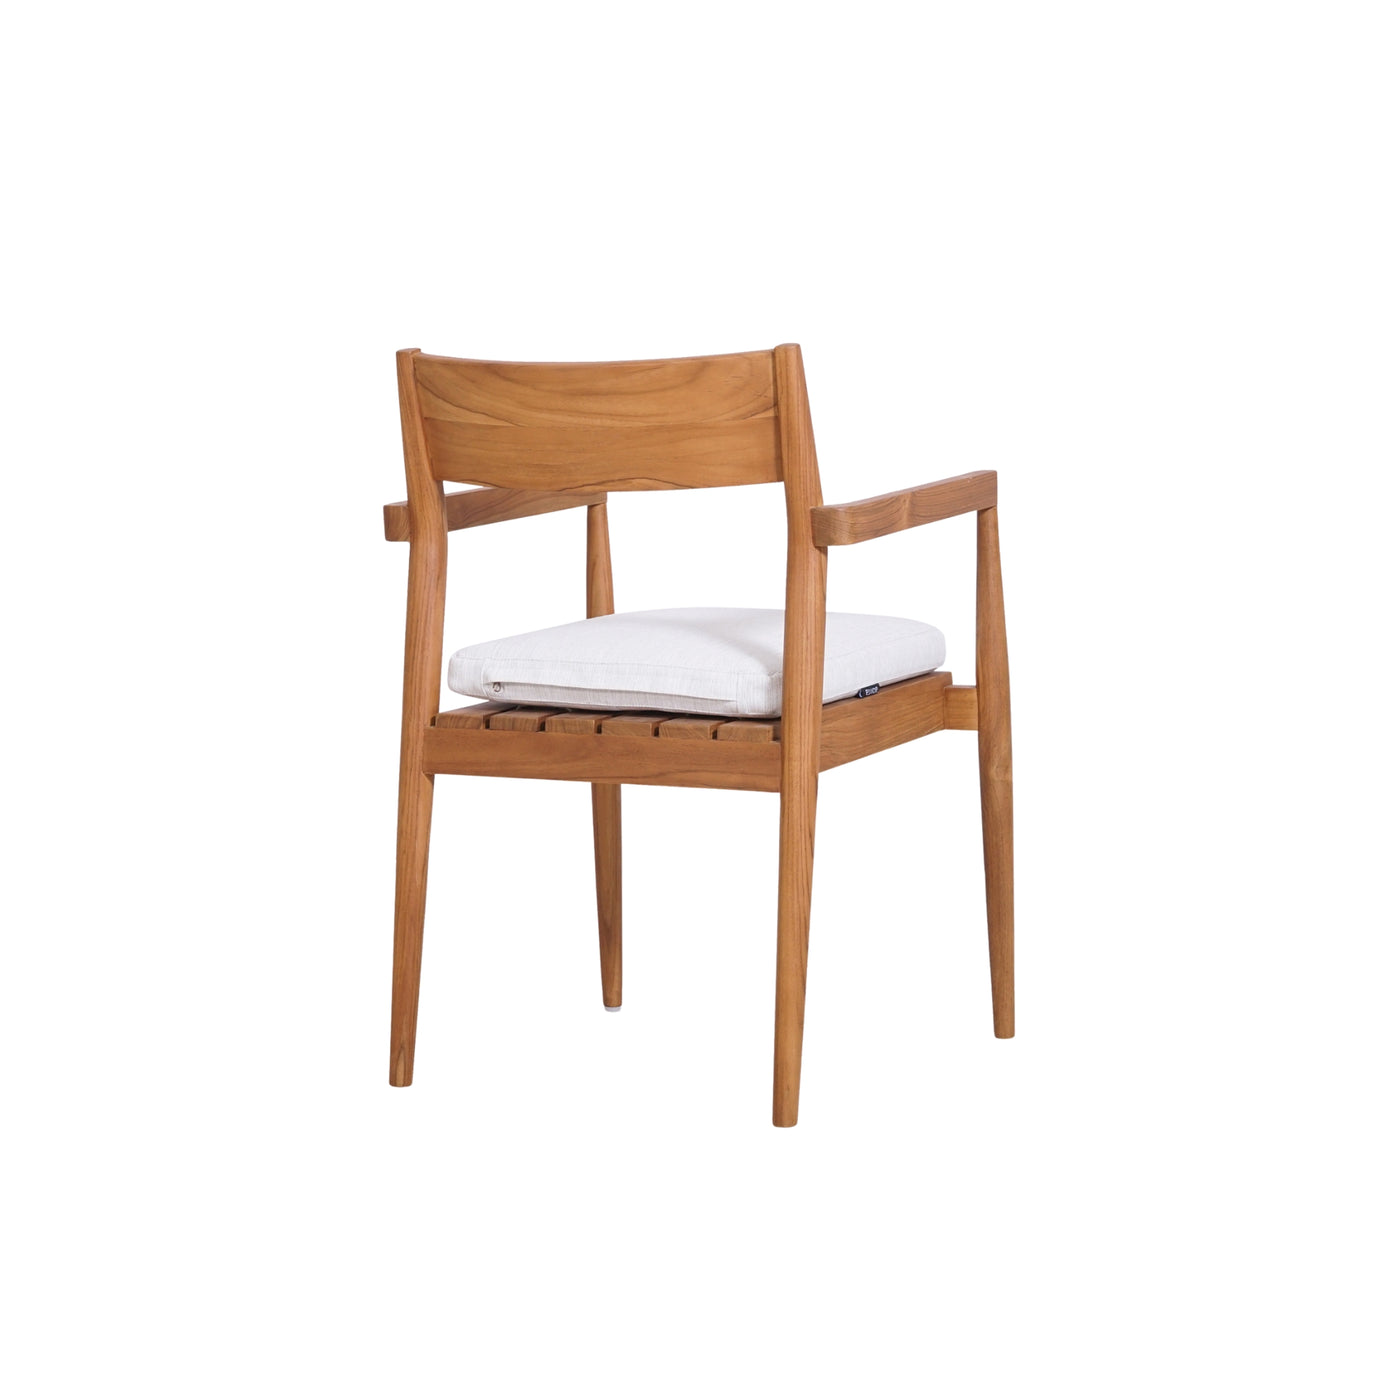 Mary Marine Natural Teak Dining Chair